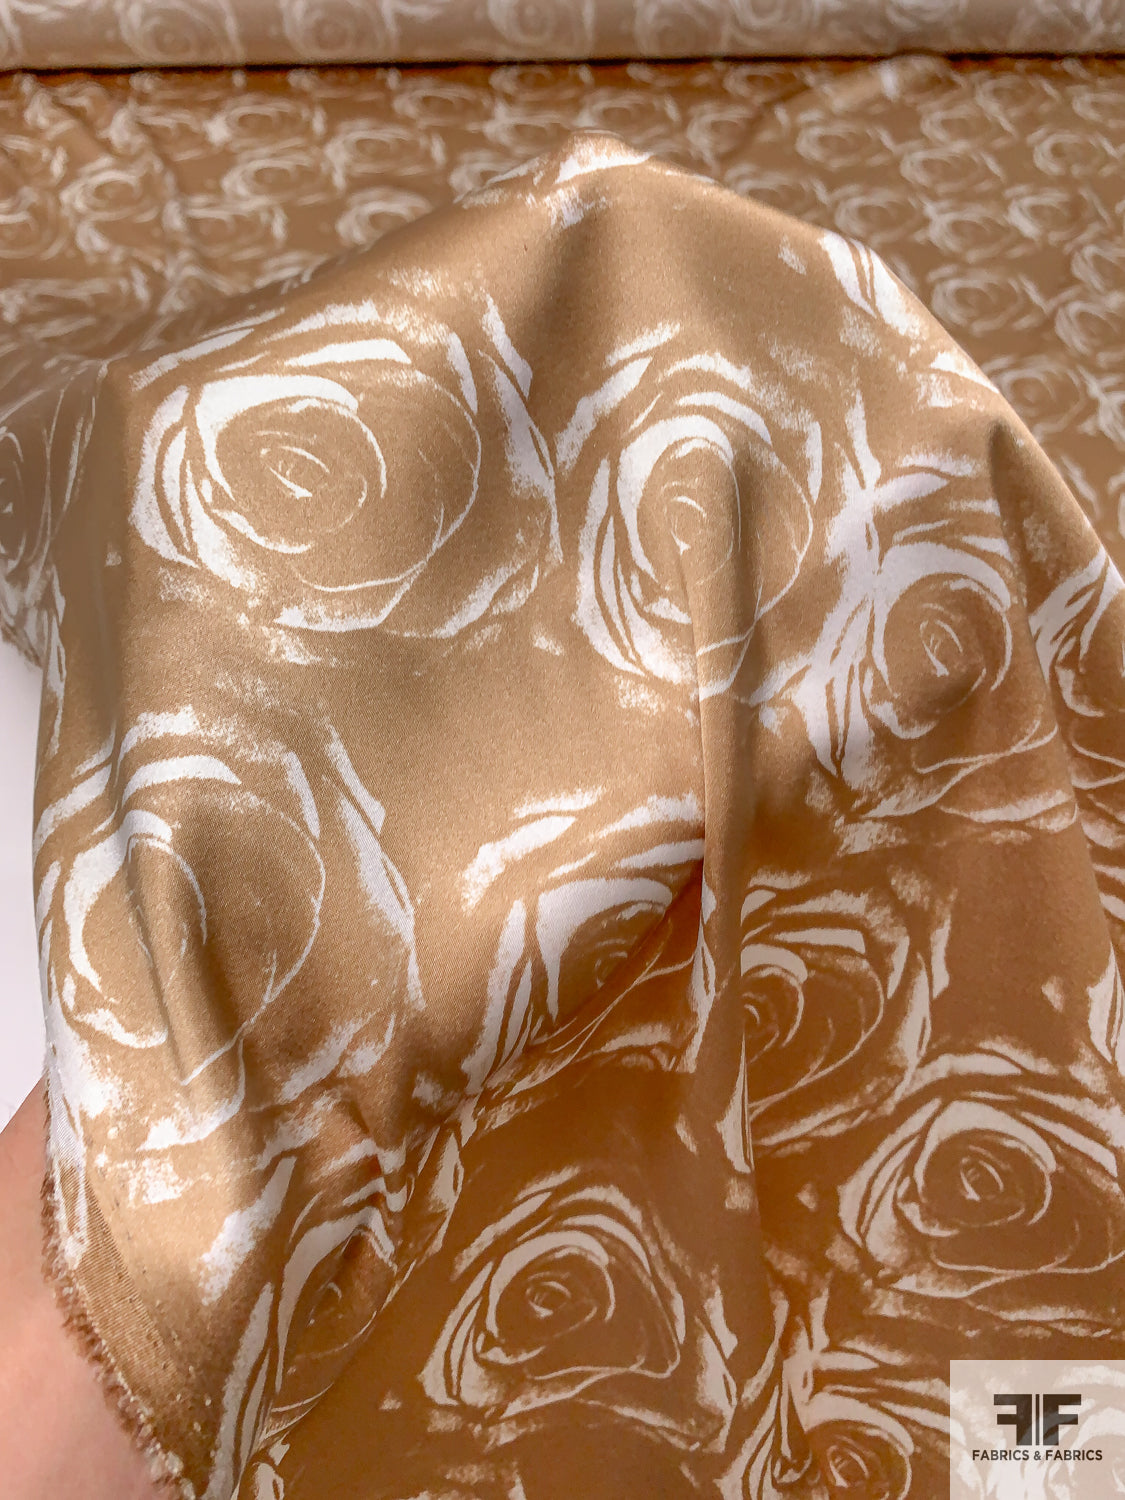 Brushed Floral Printed Stretch Silk Charmeuse - Golden Tan/Off-White